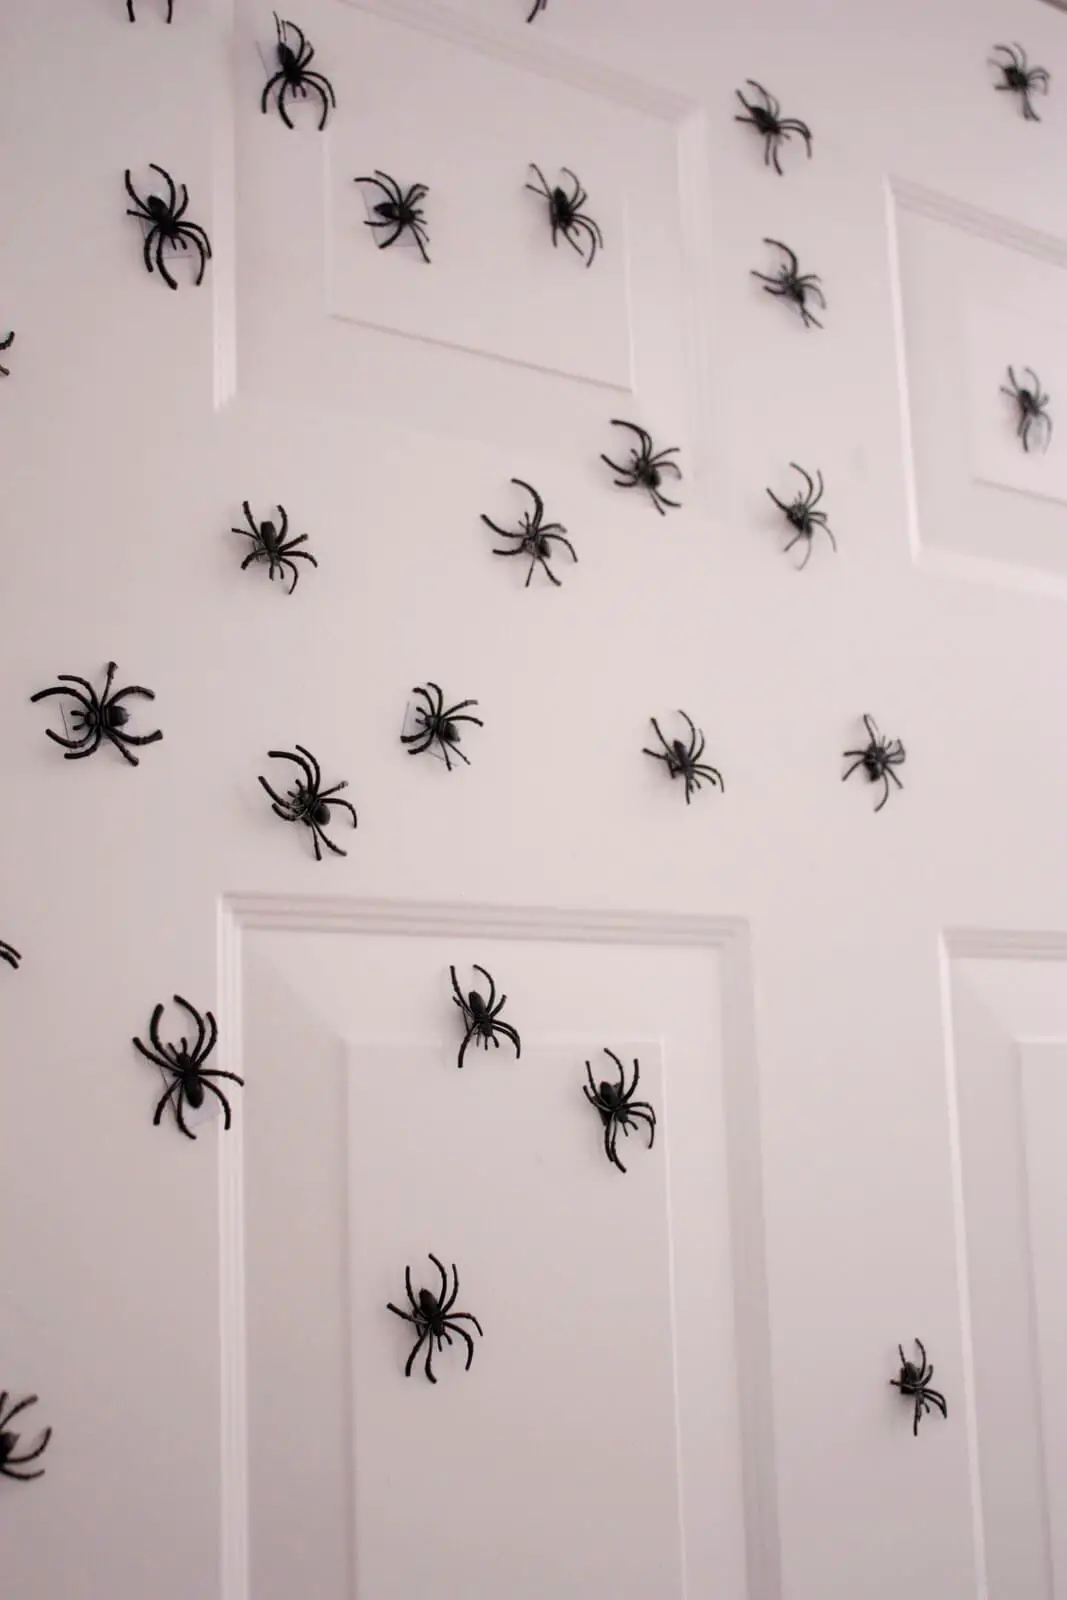 Magnetic spiders